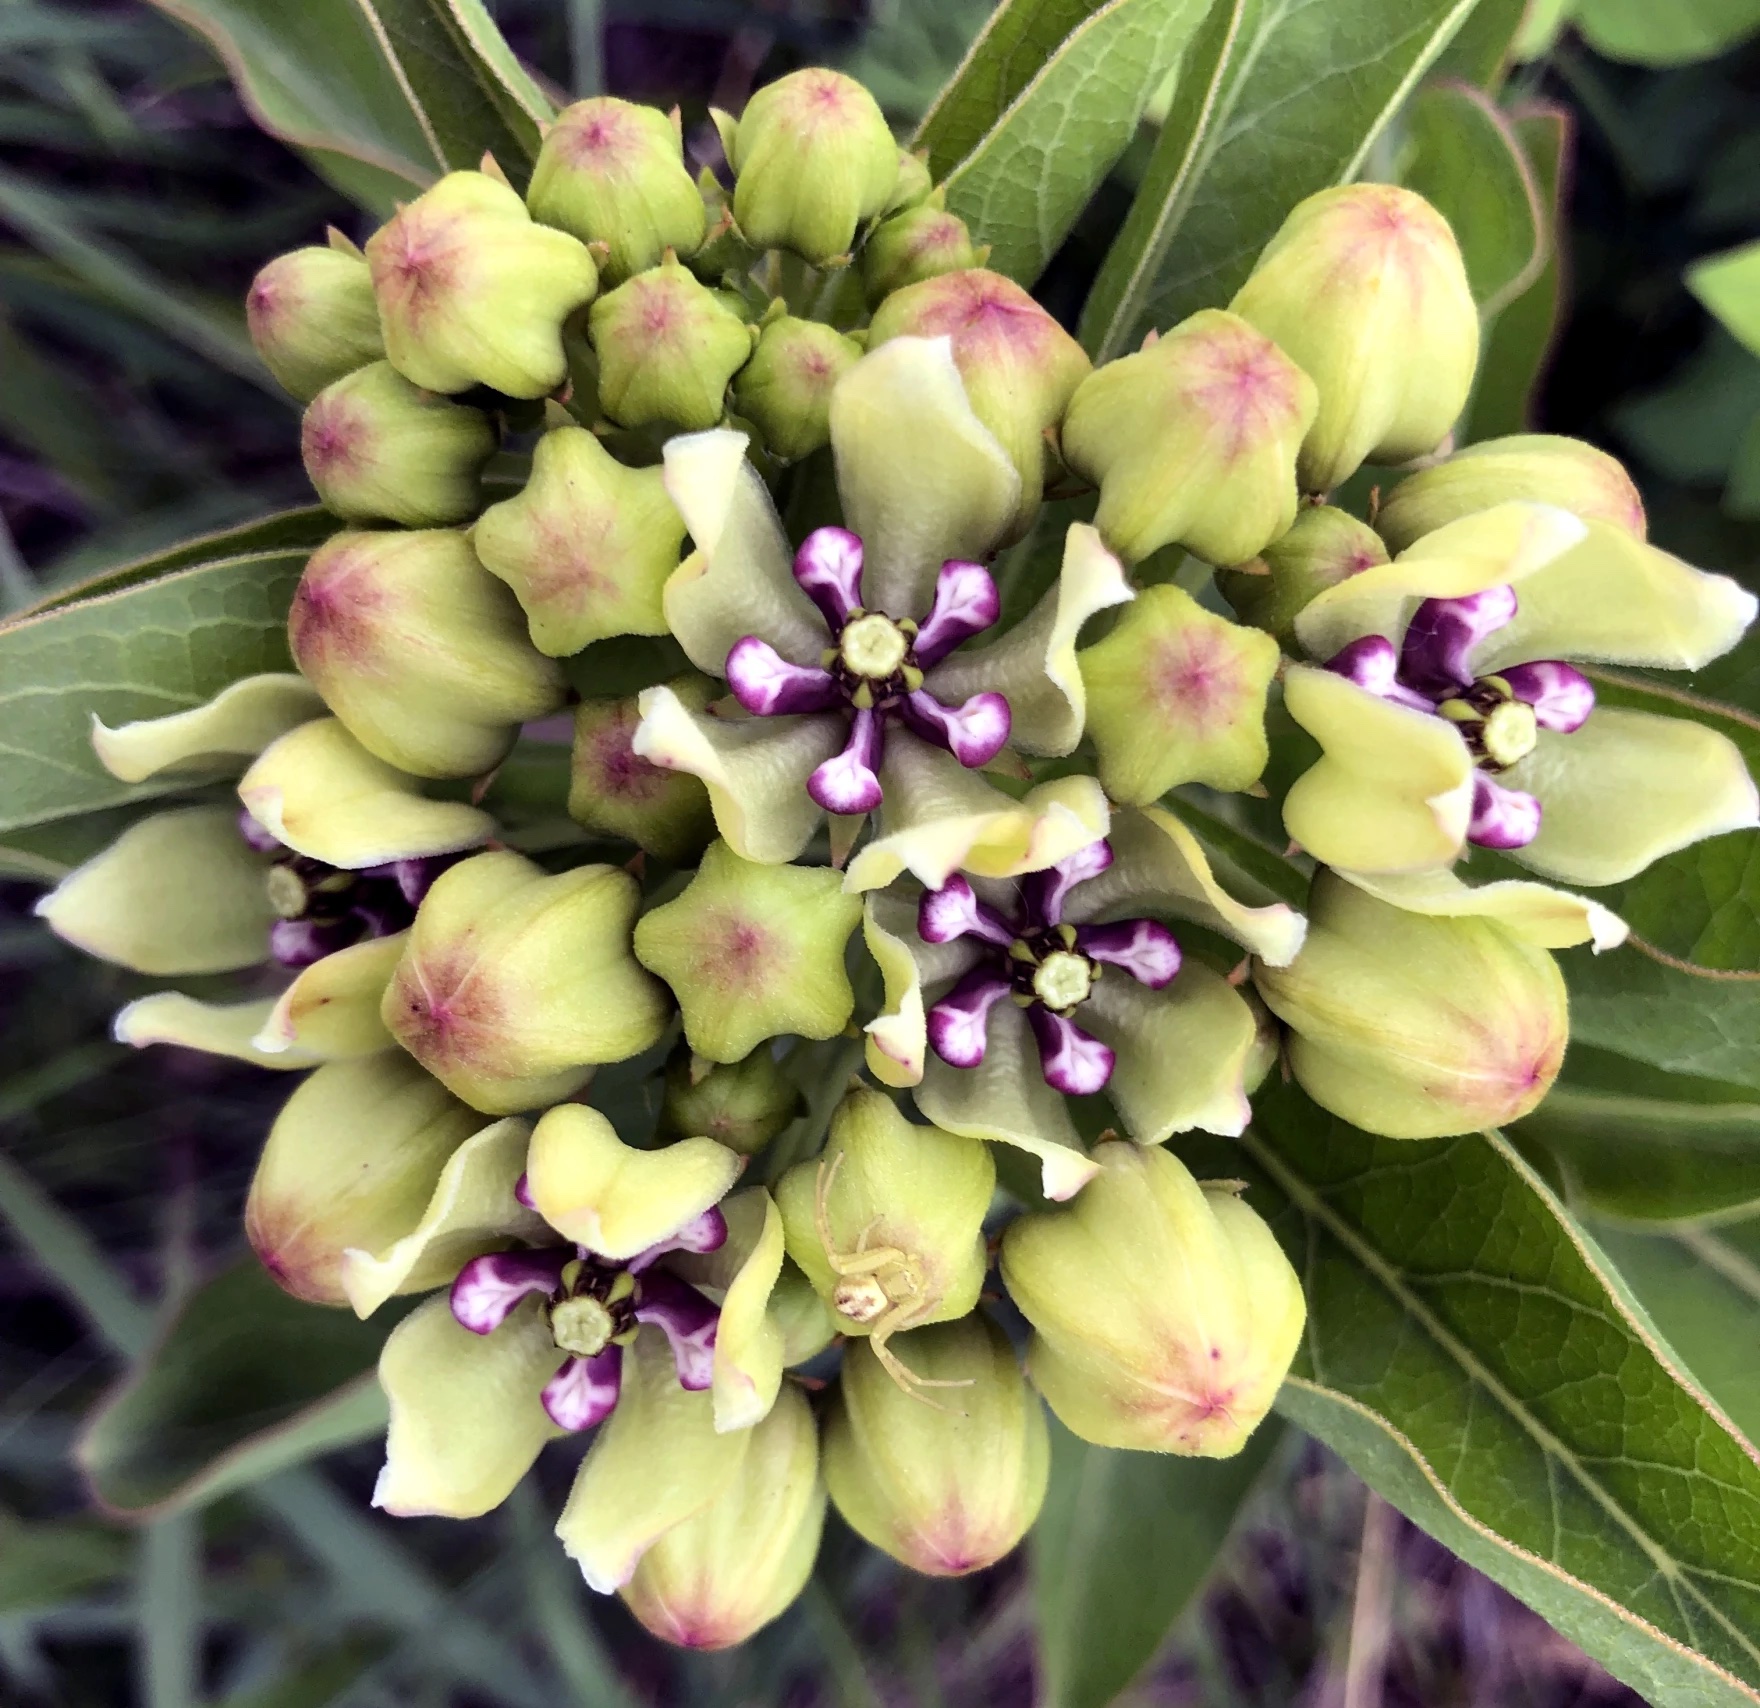 A close up of flower buds just starting to bloom.